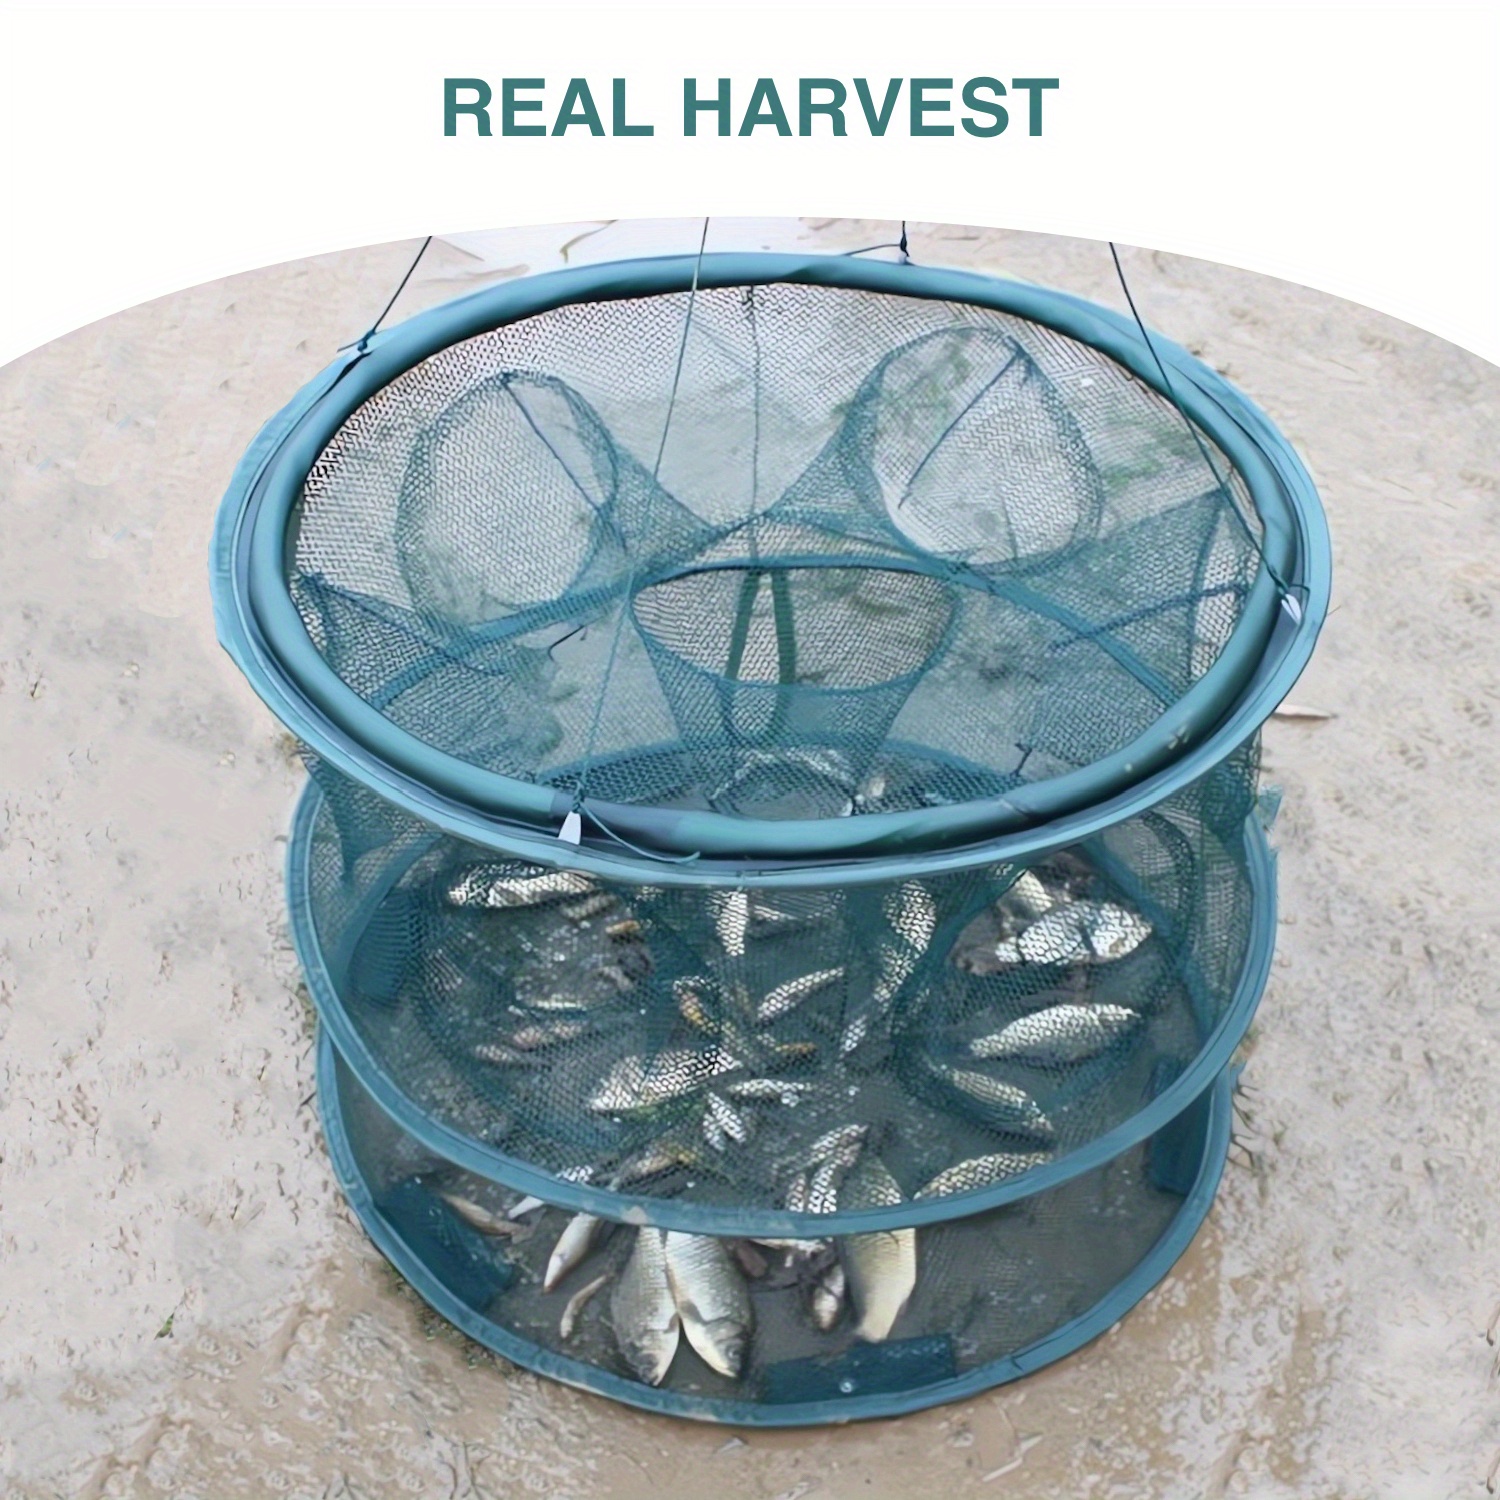 Double-deck Foldable Fishing Trap - Collapsible Fishing Net For Catching  Crab, Lobster, Crawfish, And Shrimp, Foldable Versatile Aquatic Cage With 7  H